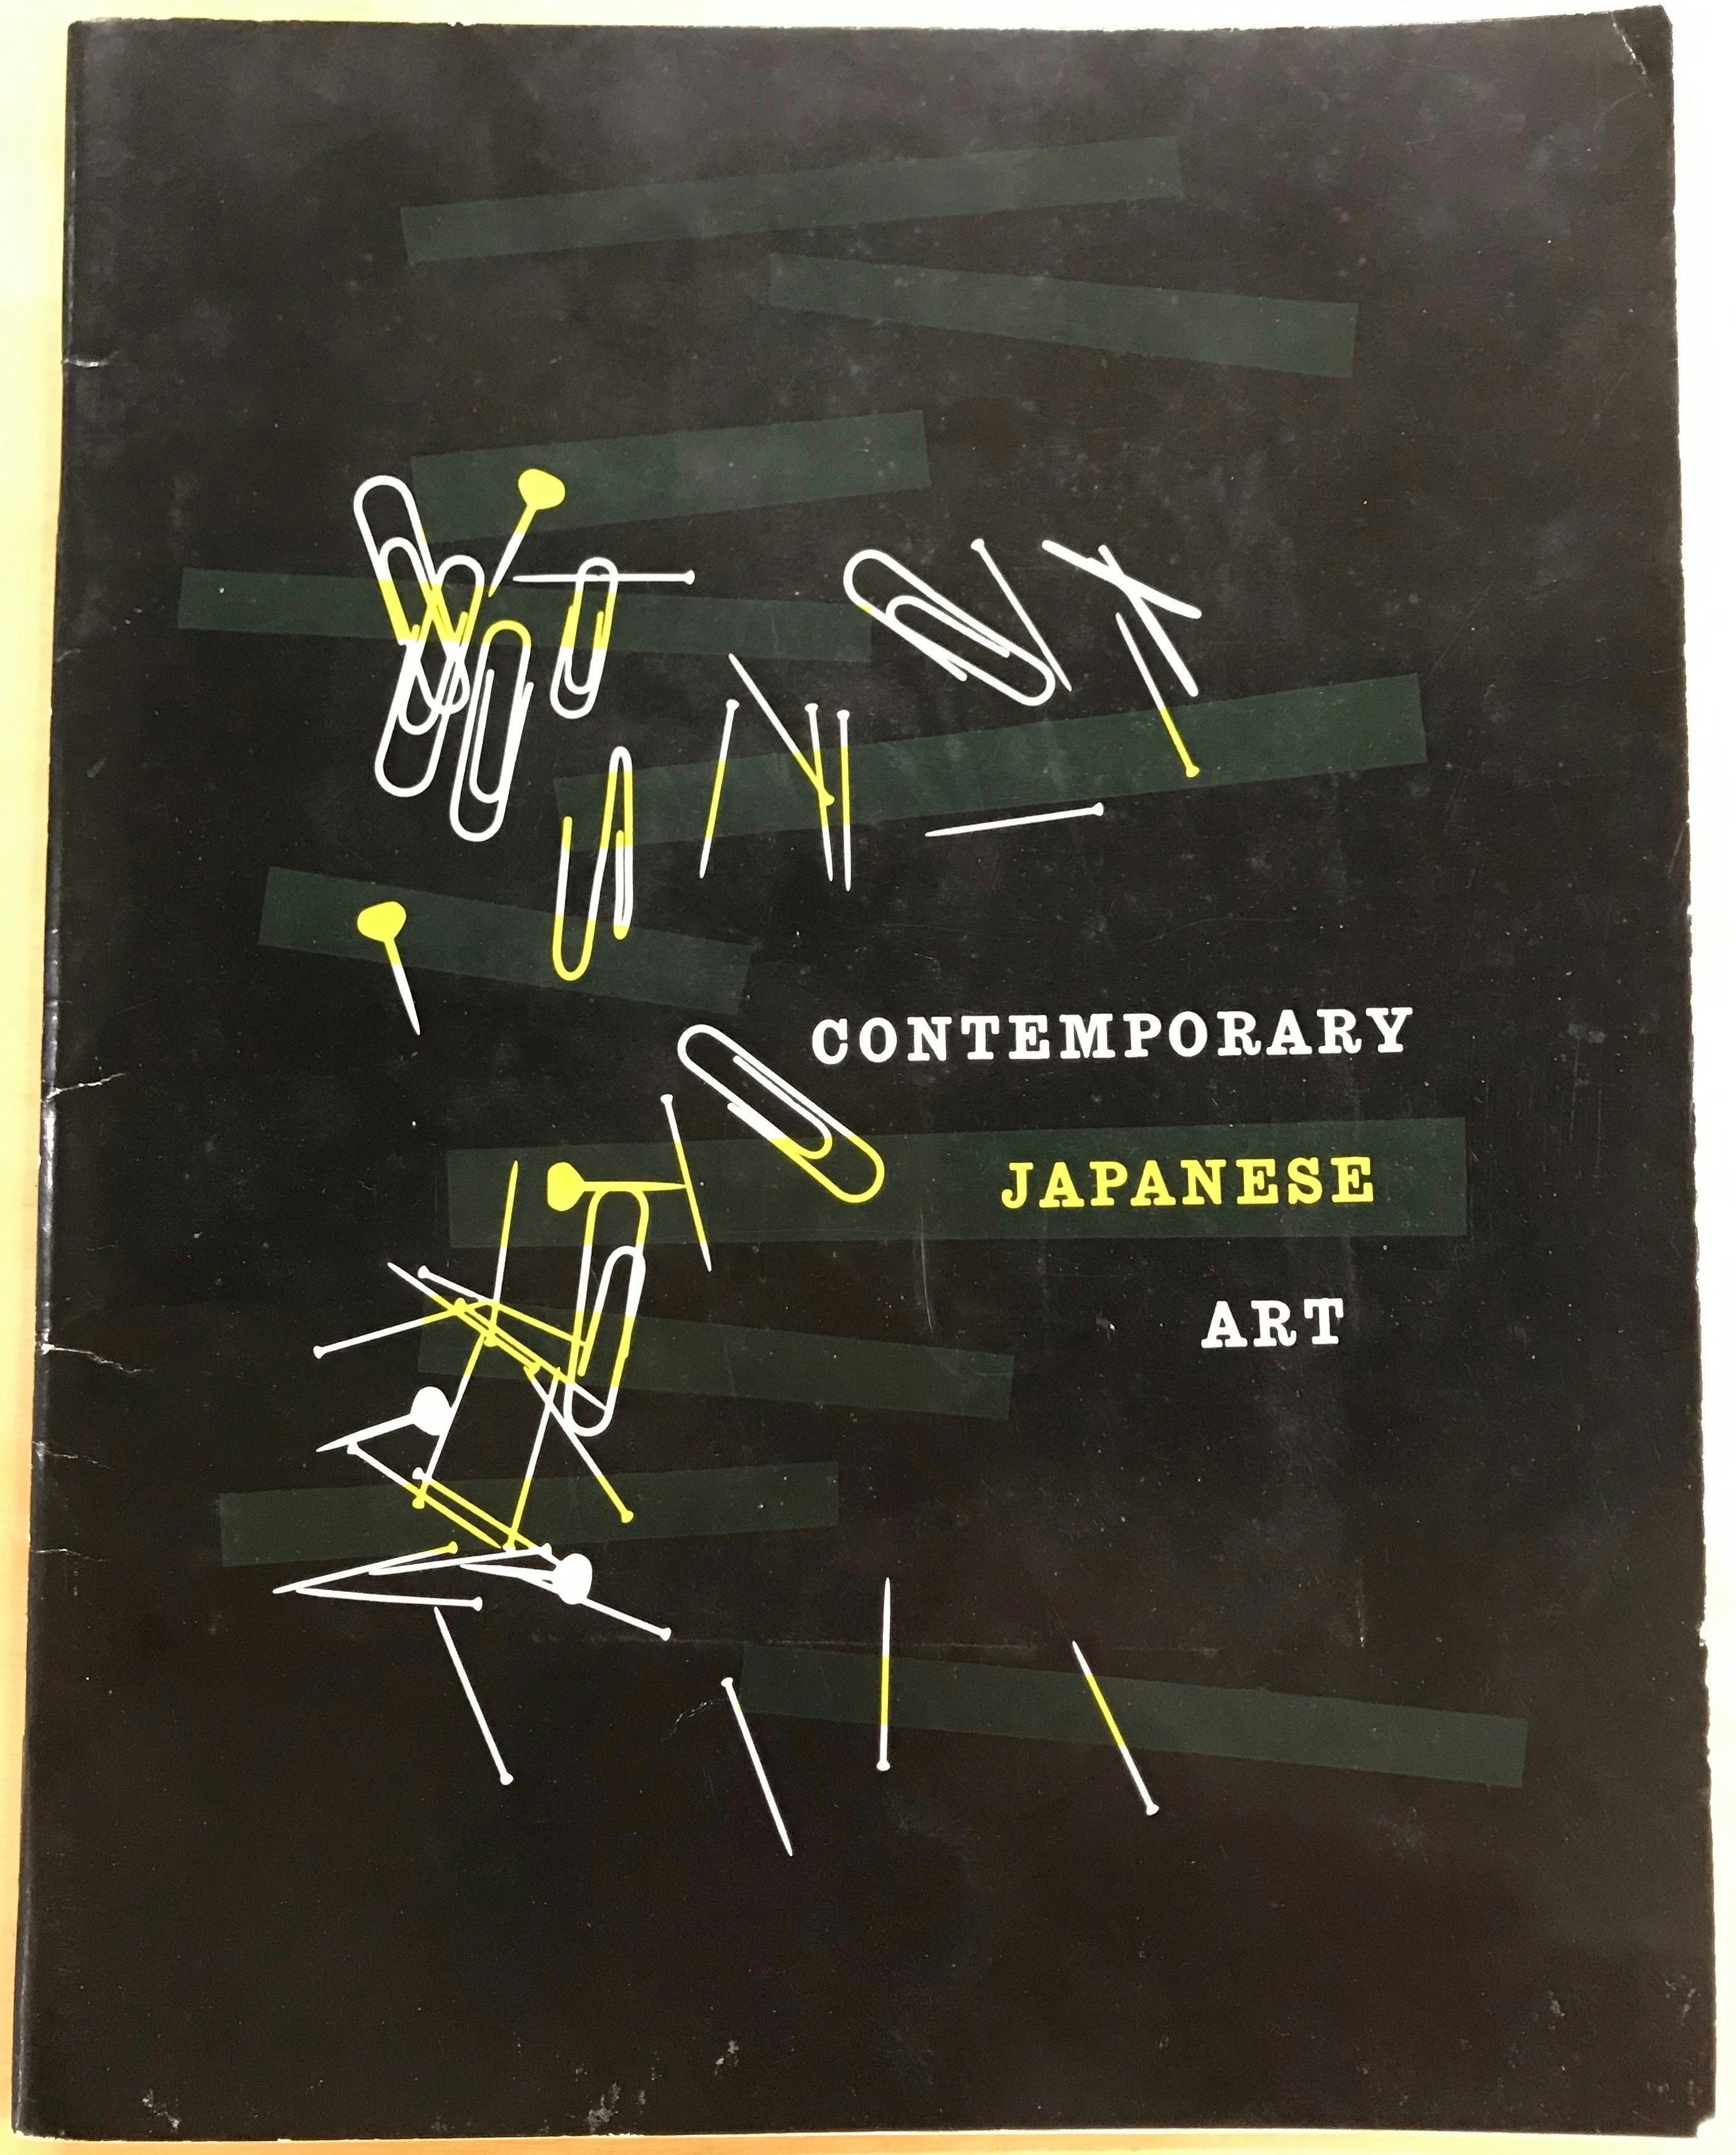 Front cover of a book titled 'Contemporary Japanese Art'. Title is surrounded by a spread of push pins, paper clips and dark green rectangles.